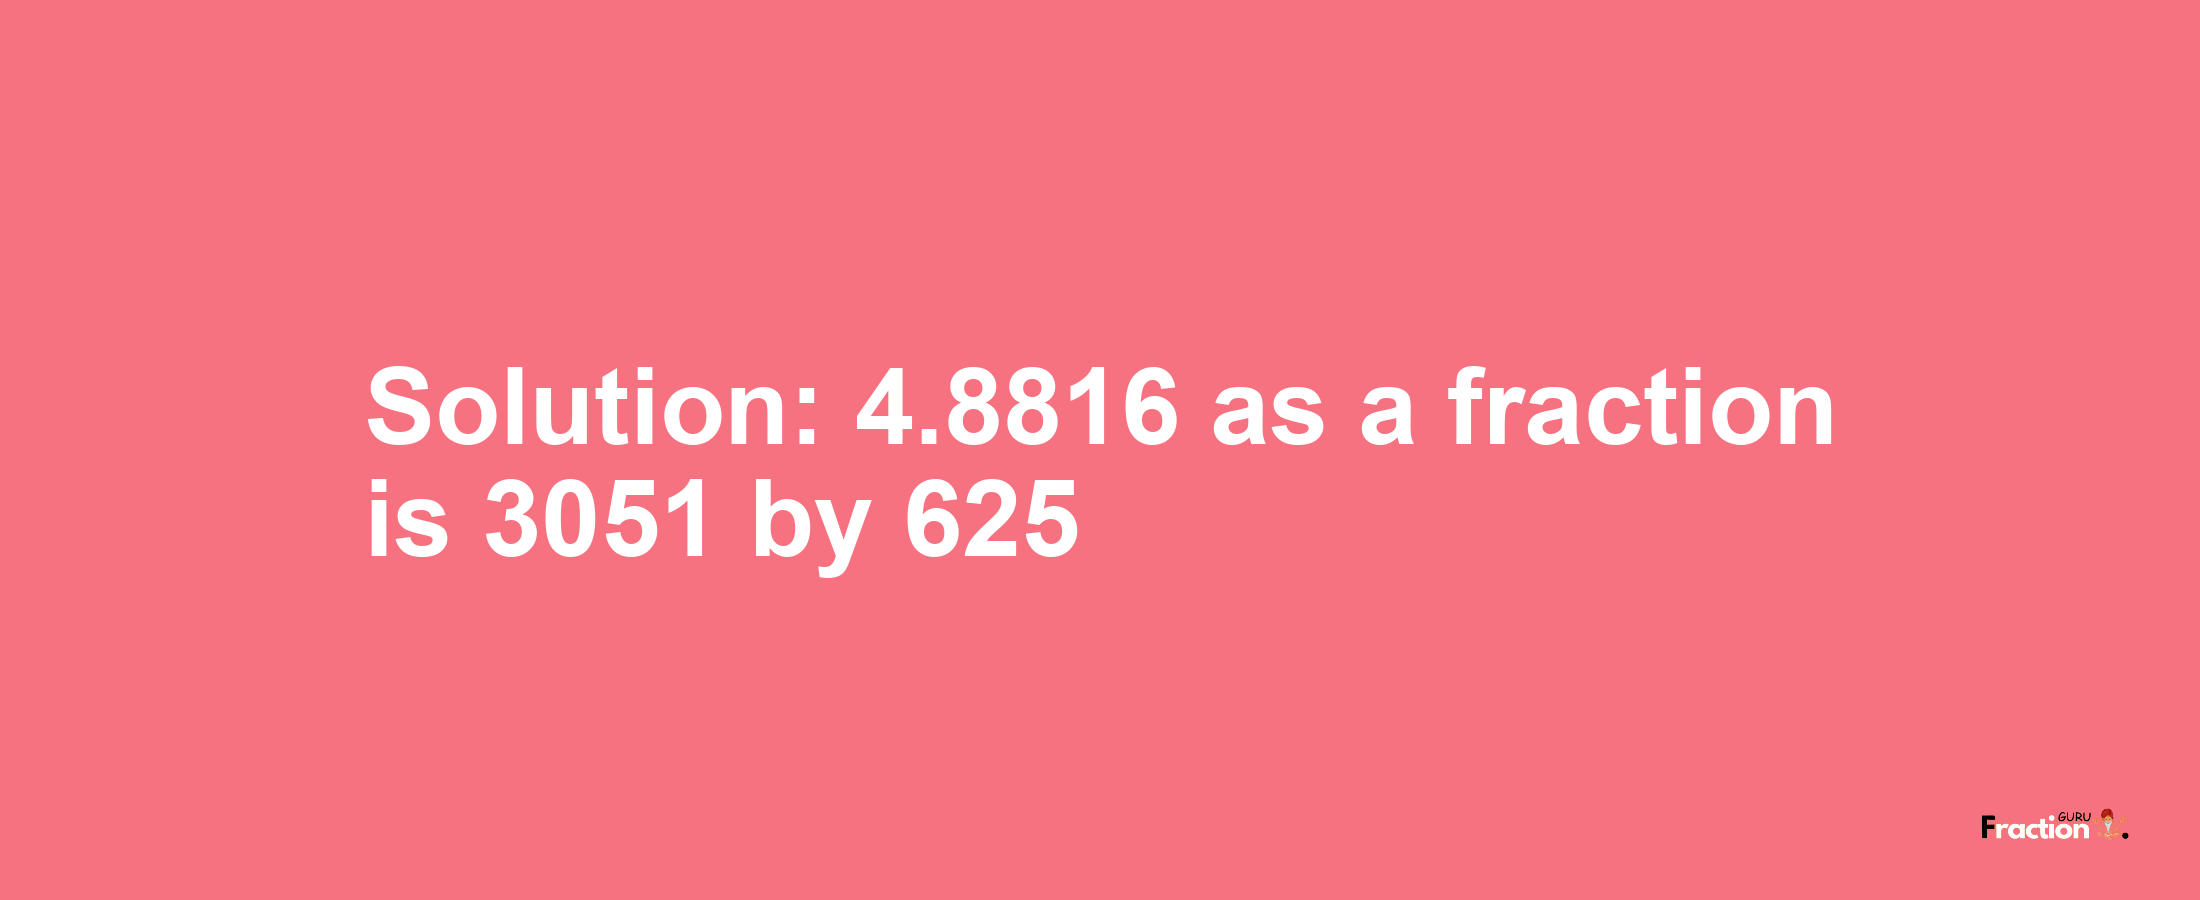 Solution:4.8816 as a fraction is 3051/625